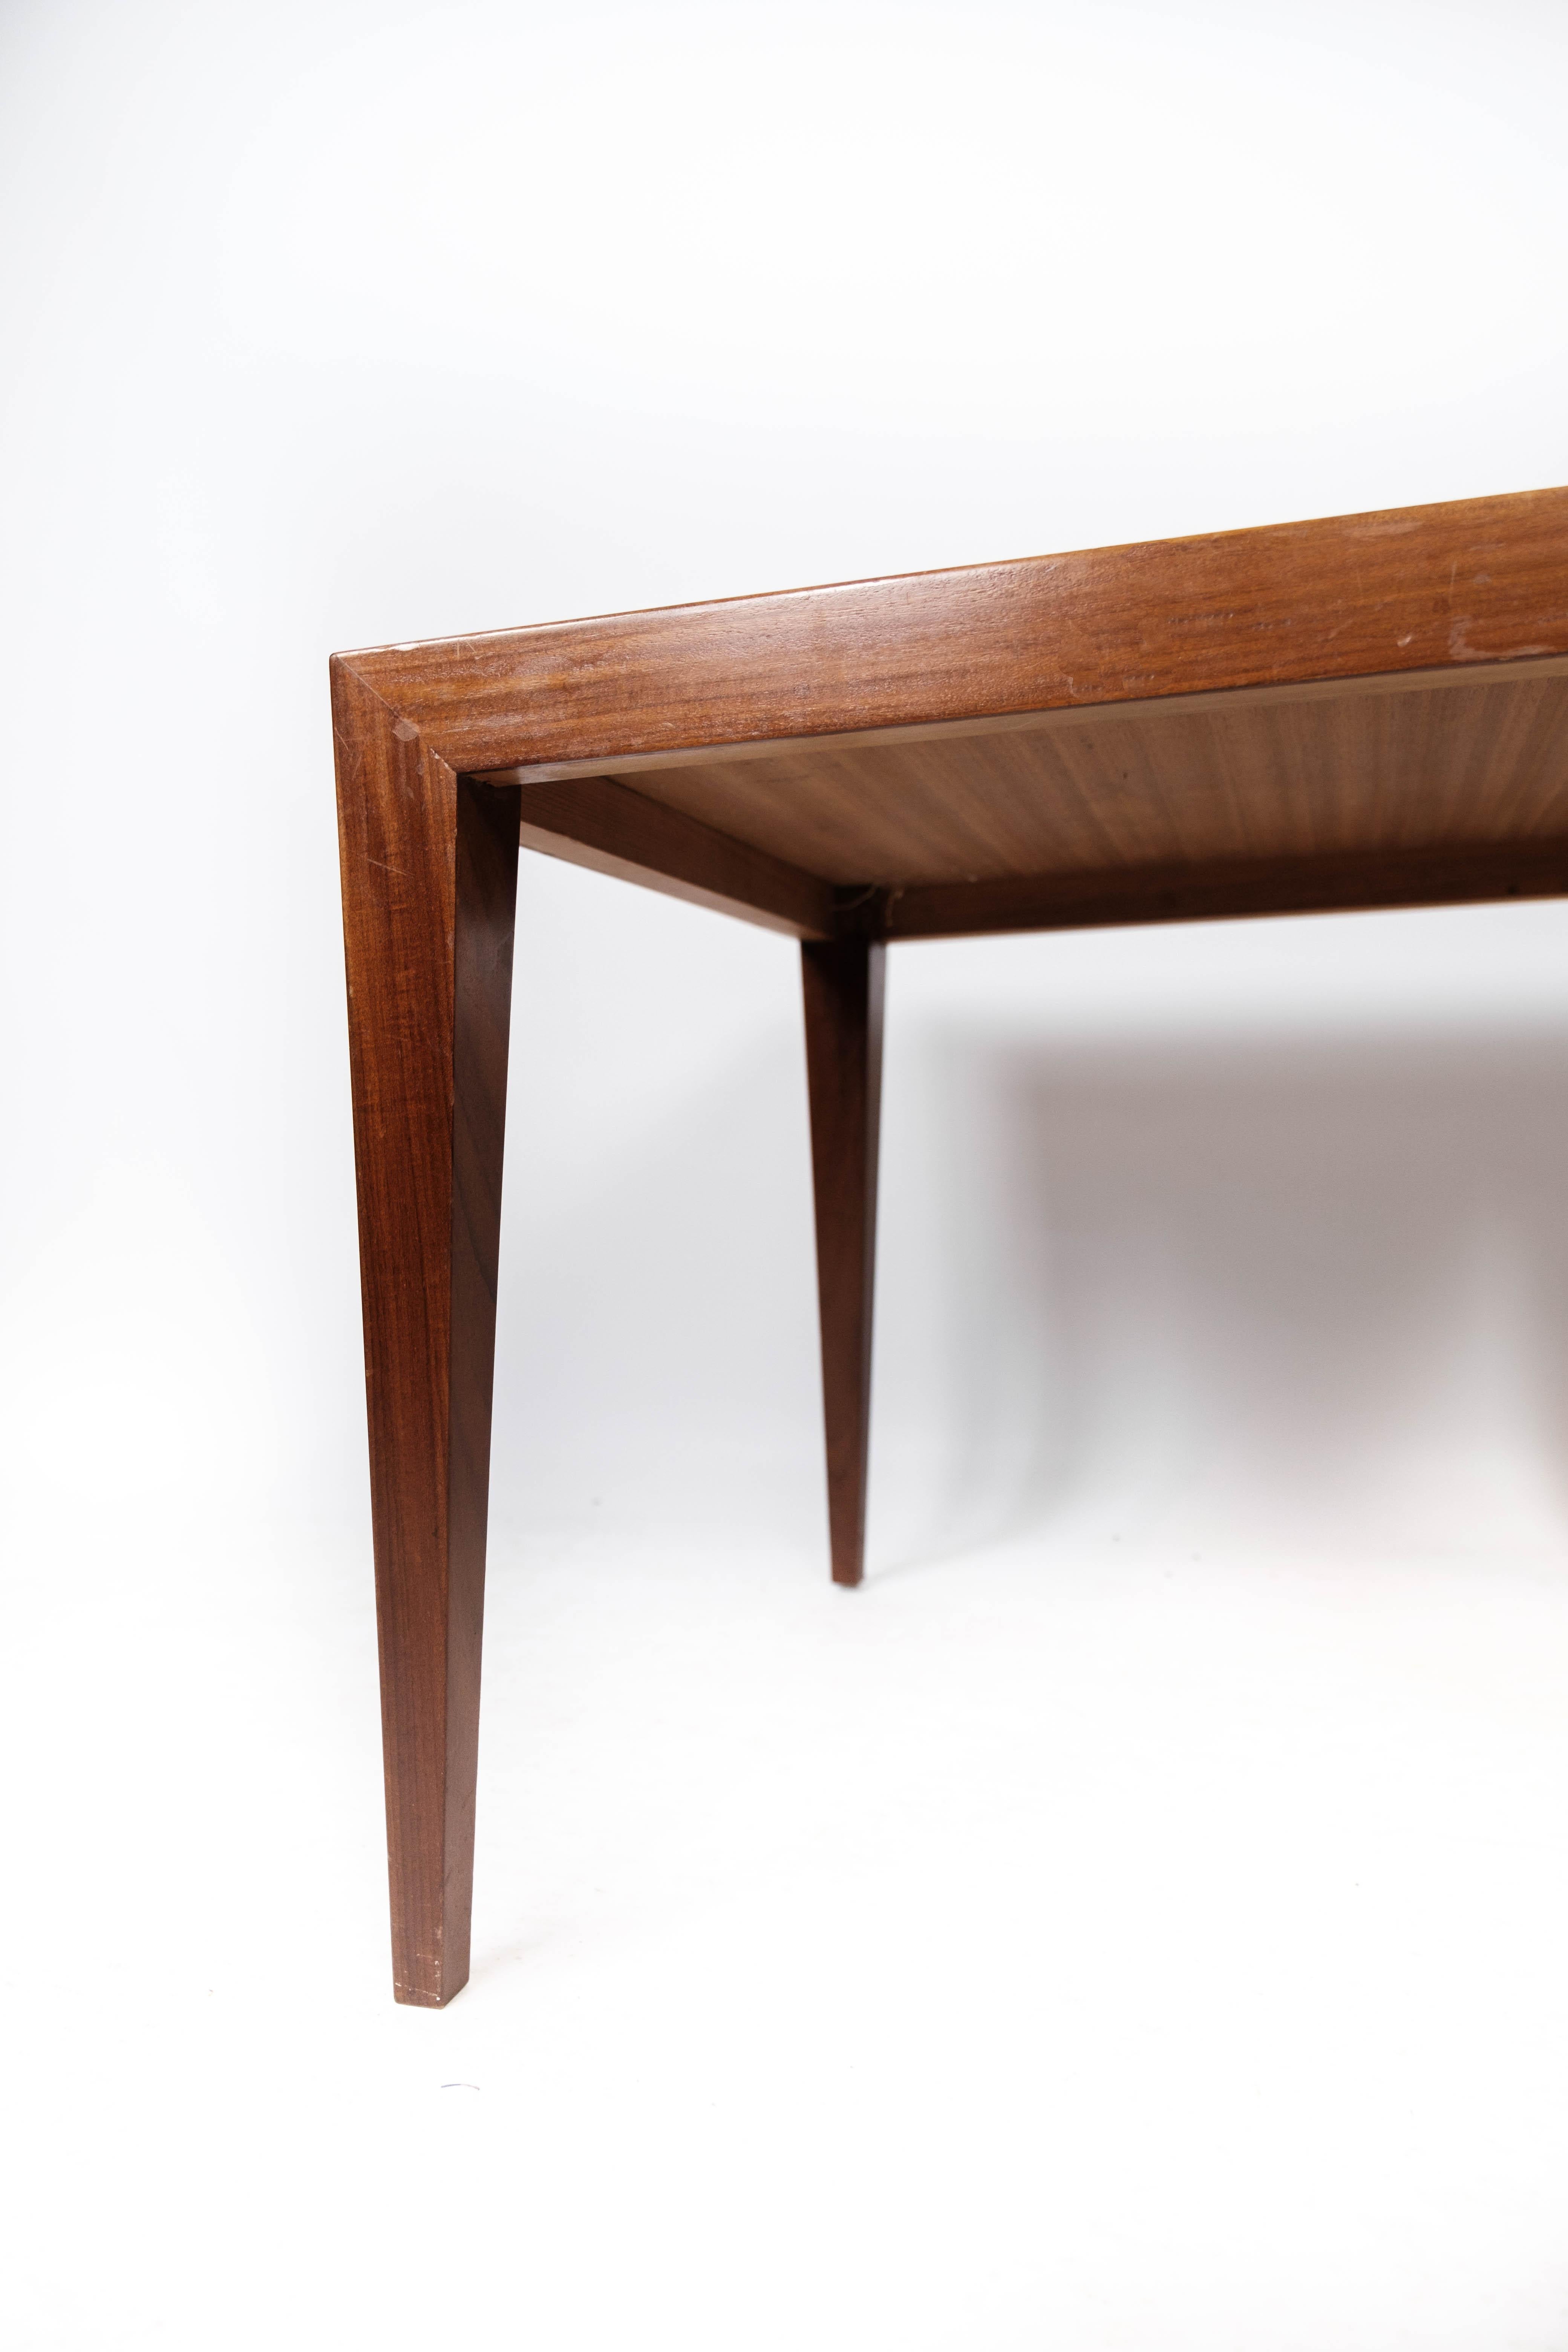 Side Table in Teak of Danish Design Manufactured by Haslev Furniture, 1960s For Sale 1